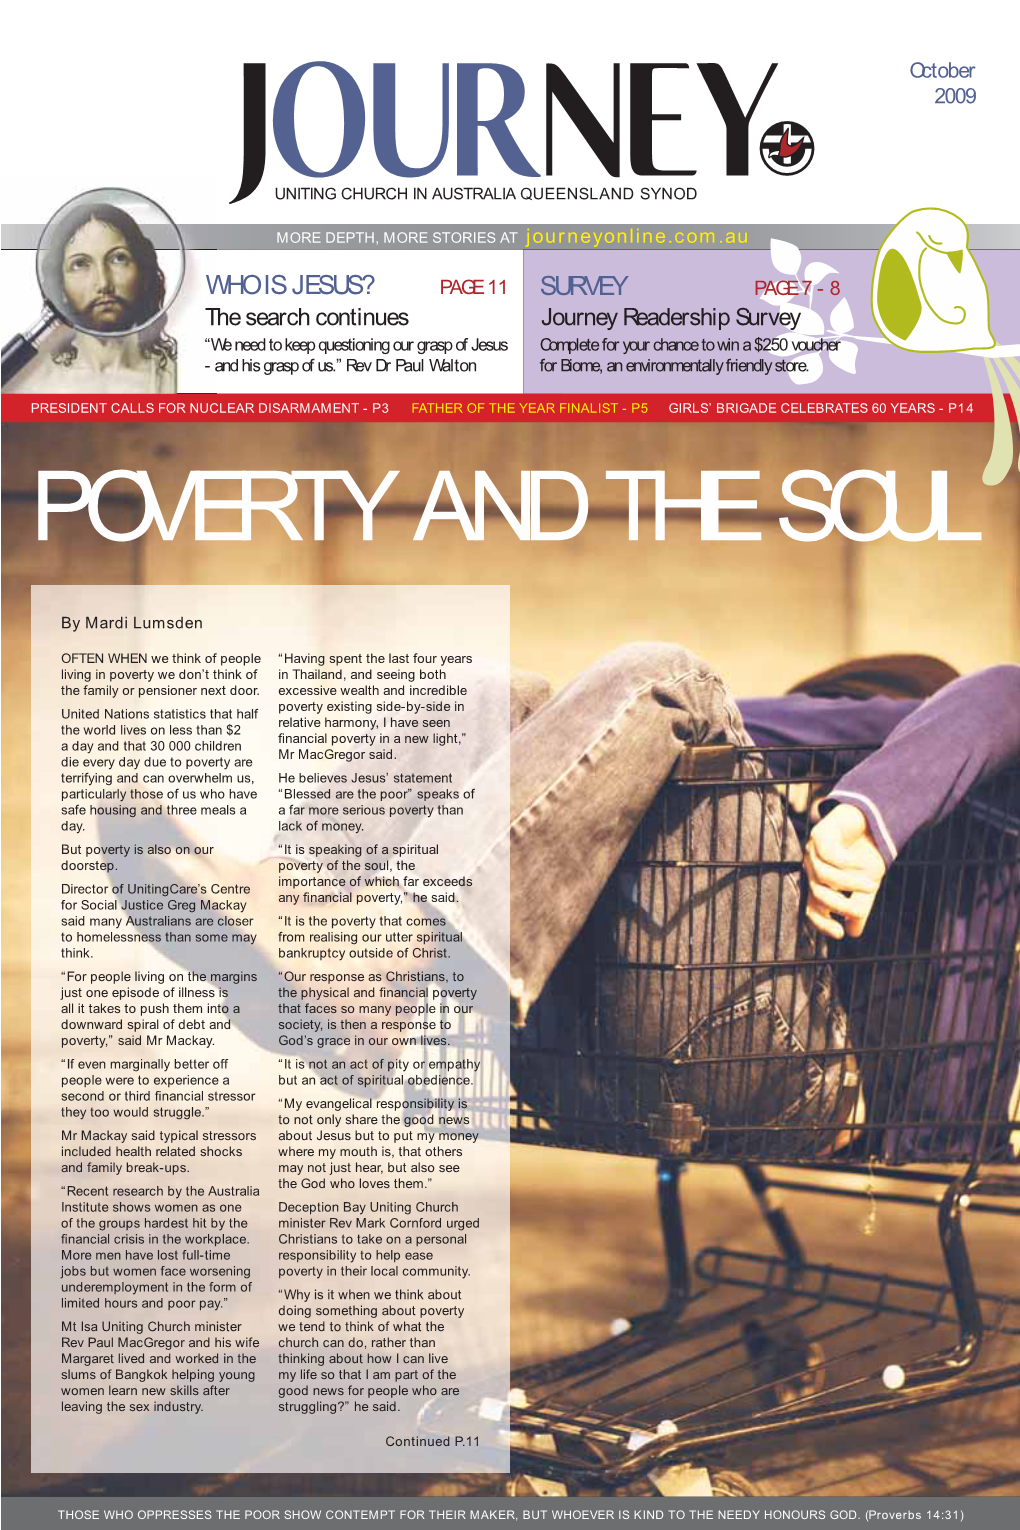 Poverty and the Soul